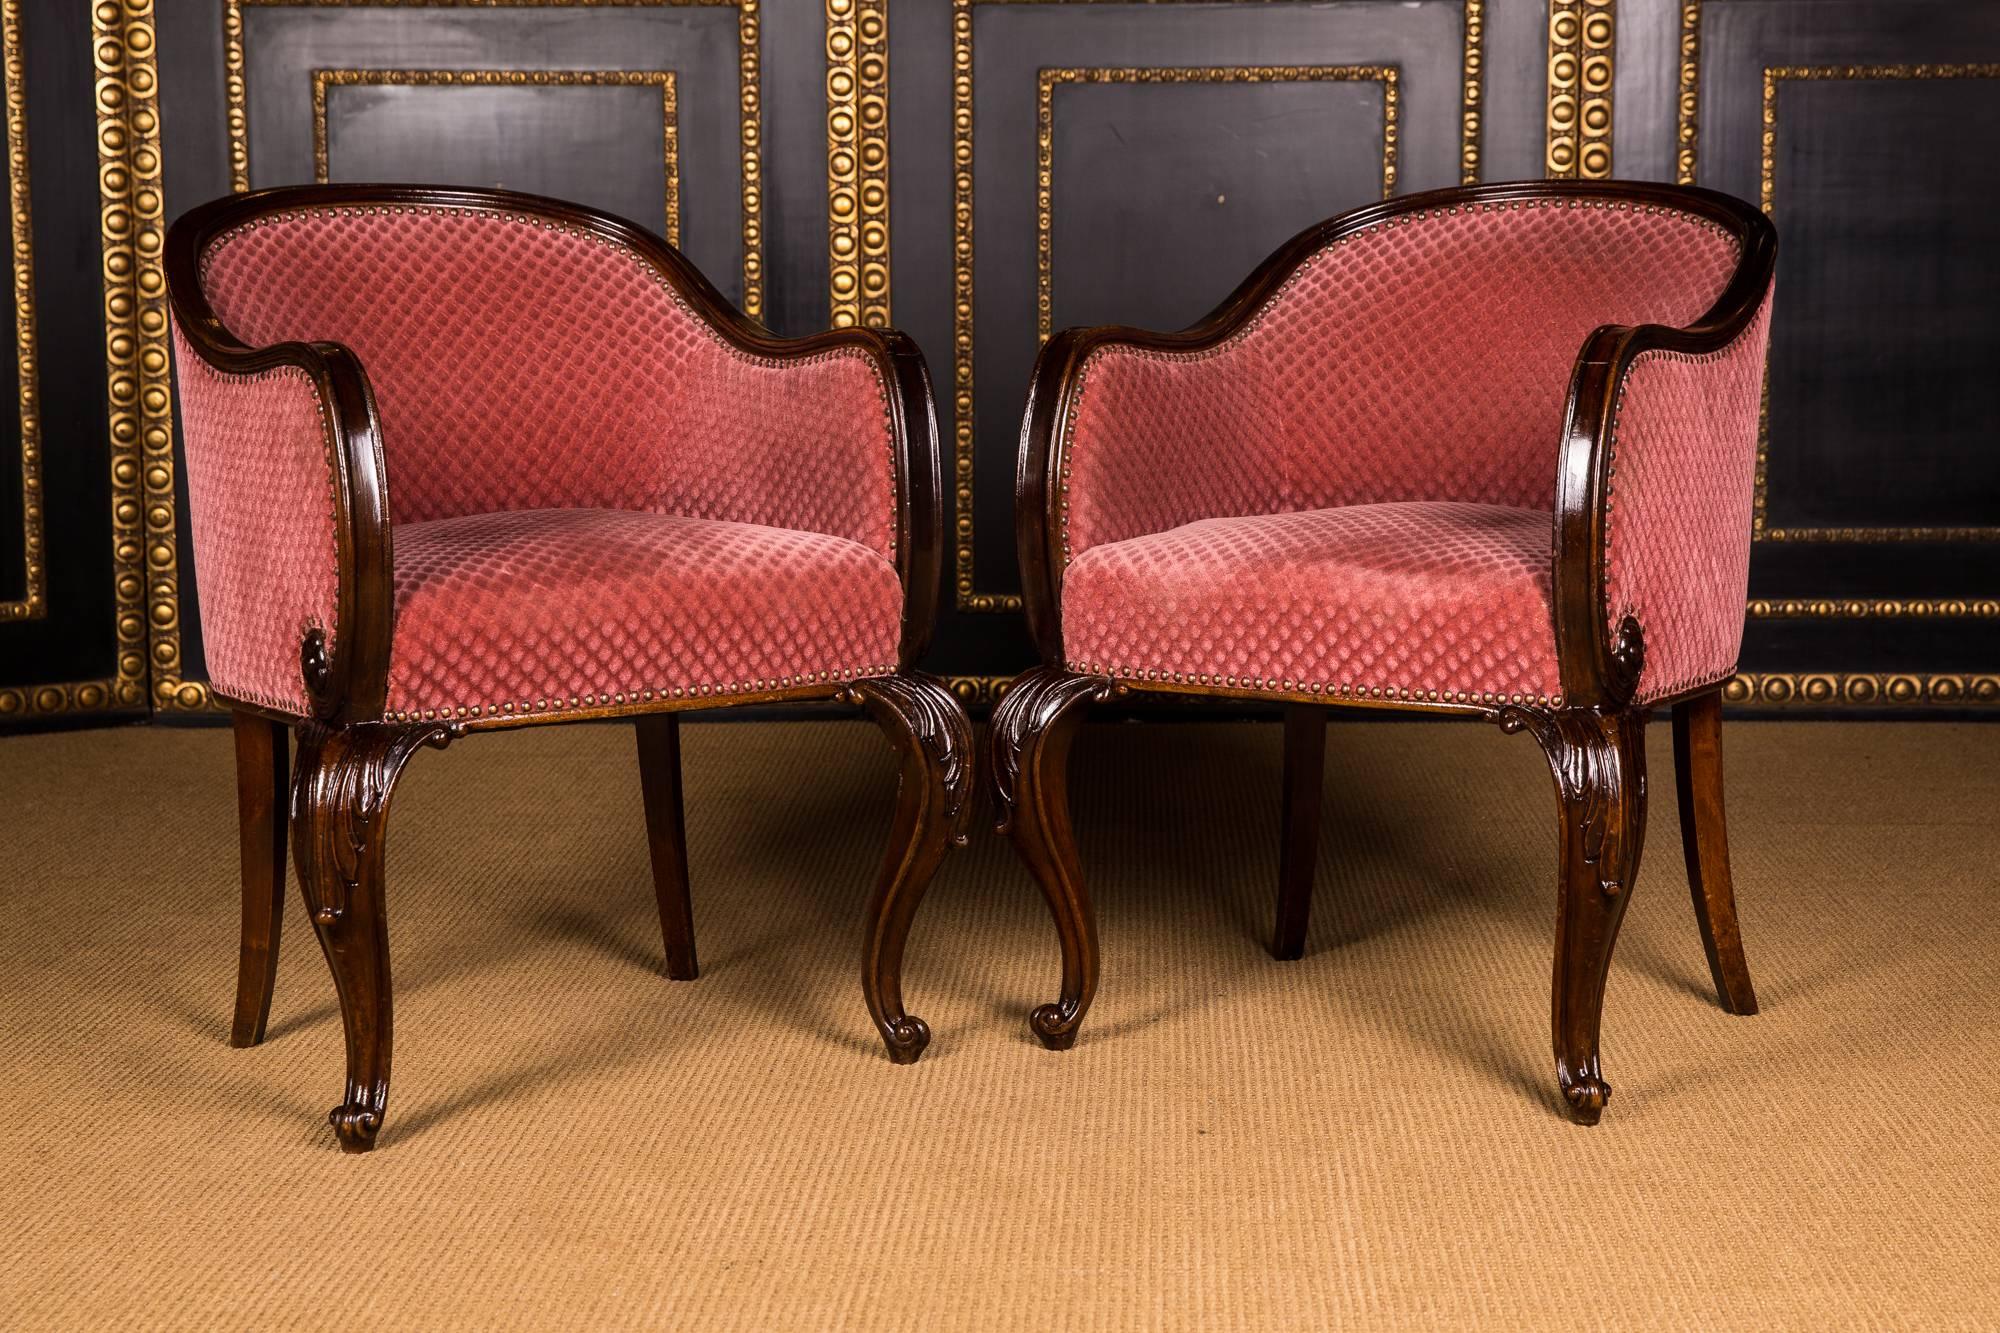 Solid mahogany wood. On curved and partially carved legs. Slightly cambered frame. Bilateral armrests bent. The hind legs are slightly outward. Curved backrest. The seat and backrest are covered with velvet.

Excellent warm patina aged over decades.